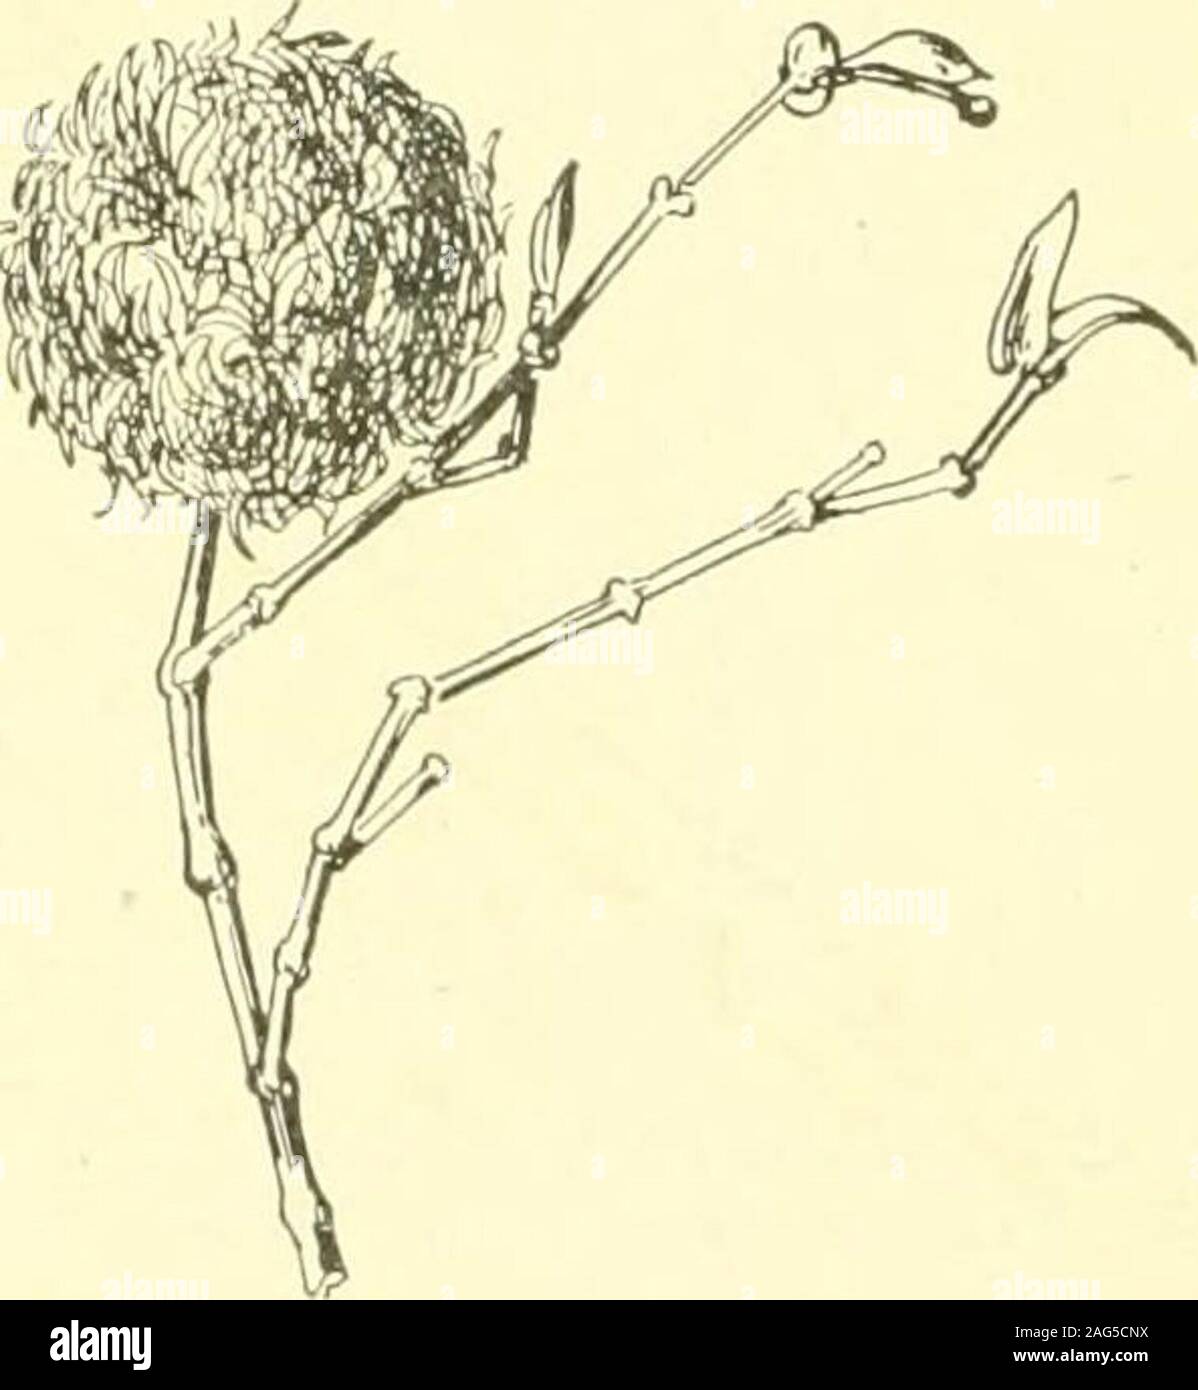 . Report of the State Entomologist on injurious and other insects of the state of New York. Fig. 161. Eriophyes on Gera-nium richardsonii. (Origi-nal) Euphorbiaceae (spurge family) ManUiot (cassava)Leaf galls. Felt loc, p. 268 Leaf galls. Felt 12c, p. 144 Itonid. I t o n i d a m a n i h o t Felt Itonid. Lasiopteryx manihot Felt Acalypha (three-seeded mercury) Subglobular, reddish brown bud gall, diameter 4 mm. Felt iij, p. 452 Itonid. C e c i d o m y i a sp. Phylkinthus distichus (Otaheite gooseberry) Reared from fruit. Felt i6d, p. 123 Itonid. Asphondylia siccae Felt 158 NEW YORK STATE MUSEUM Stock Photo